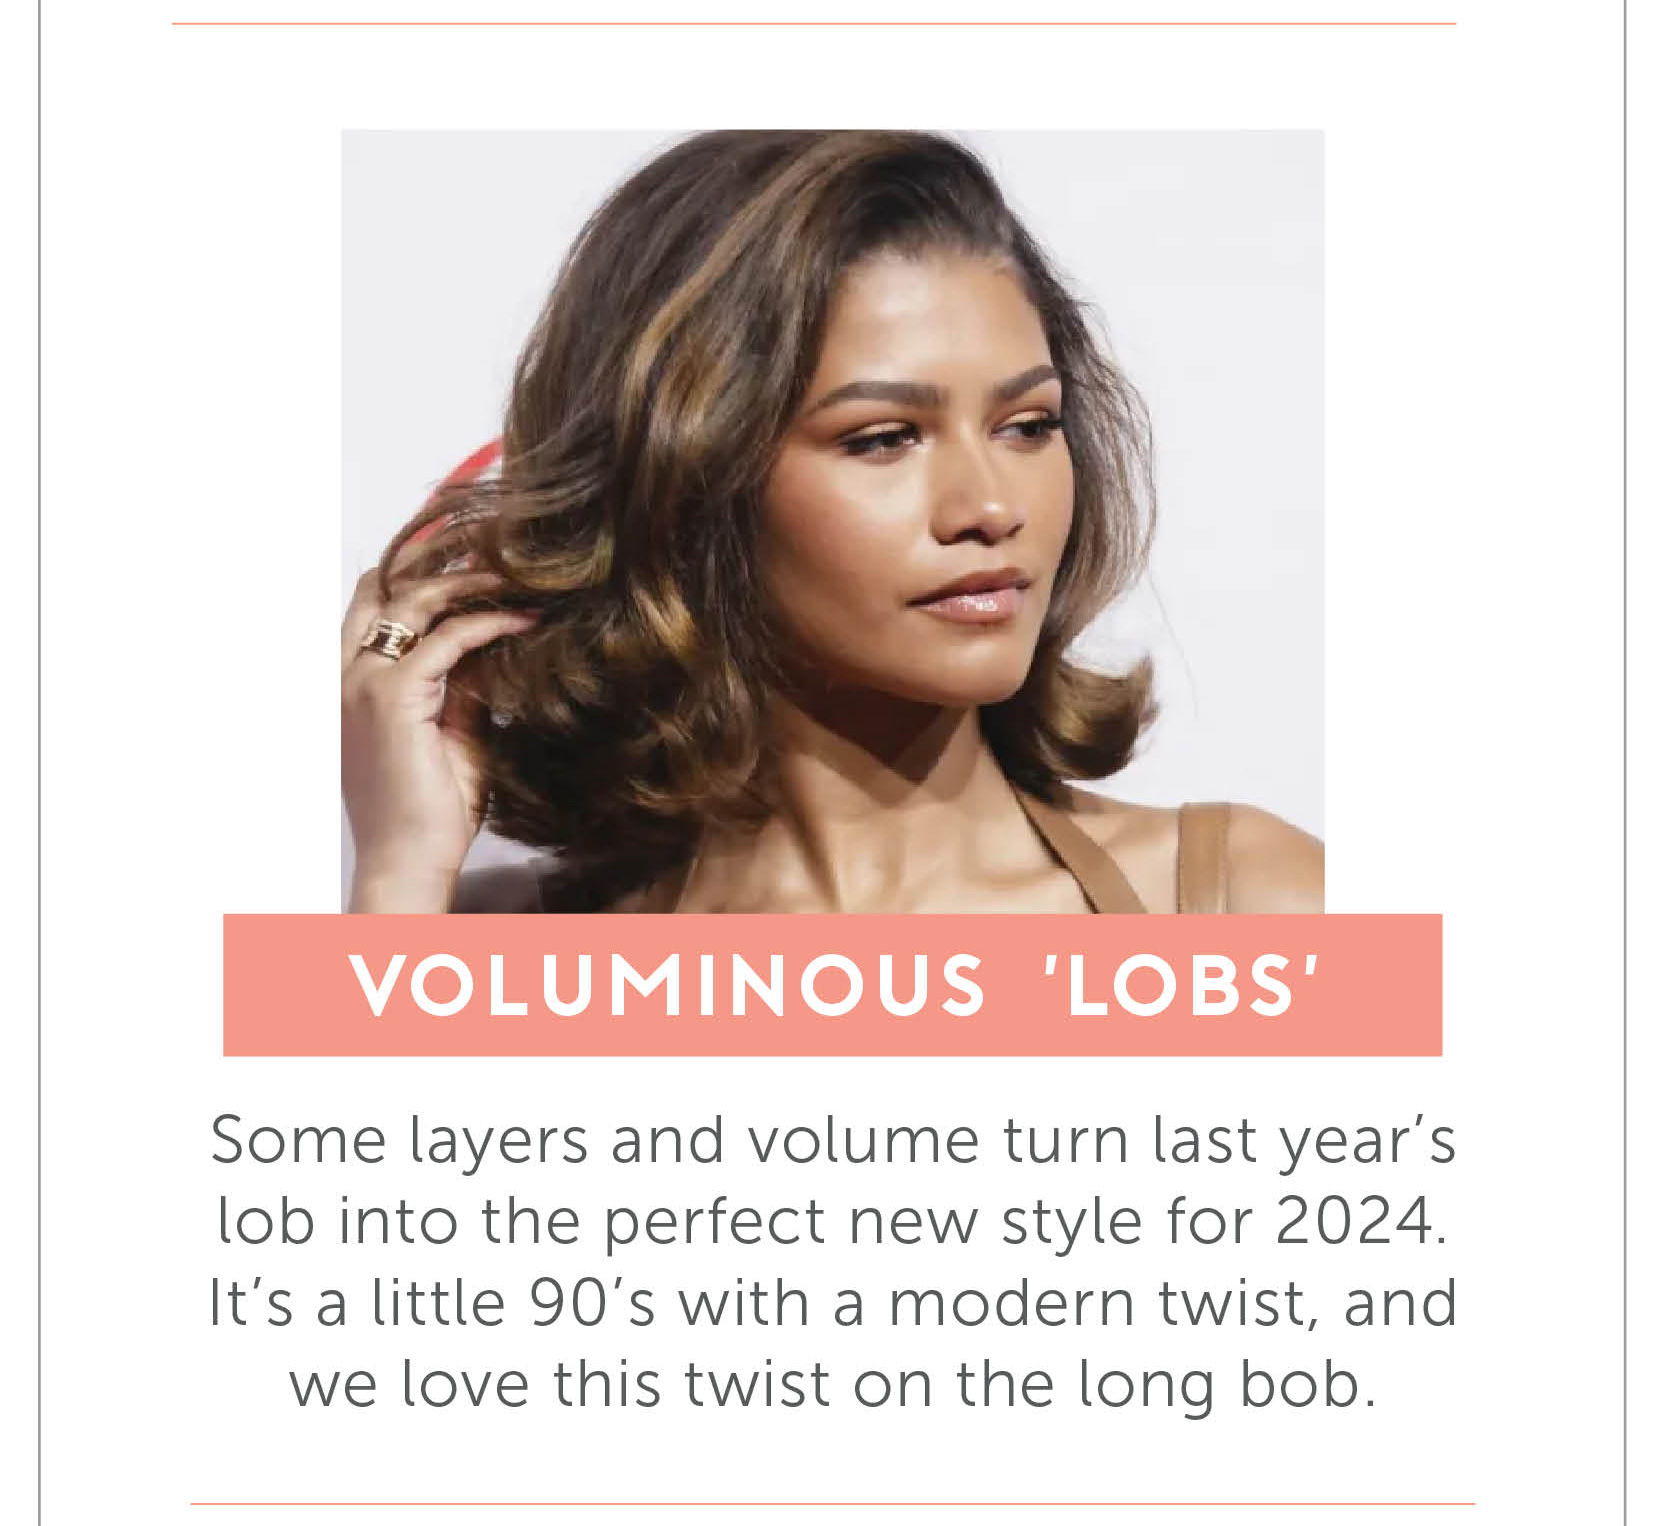 Voluminous ‘Lobs’ - Some layers and volume turn last year’s lob into the perfect new style for 2024. It’s a little 90’s with a modern twist, and we love this twist on the long bob.